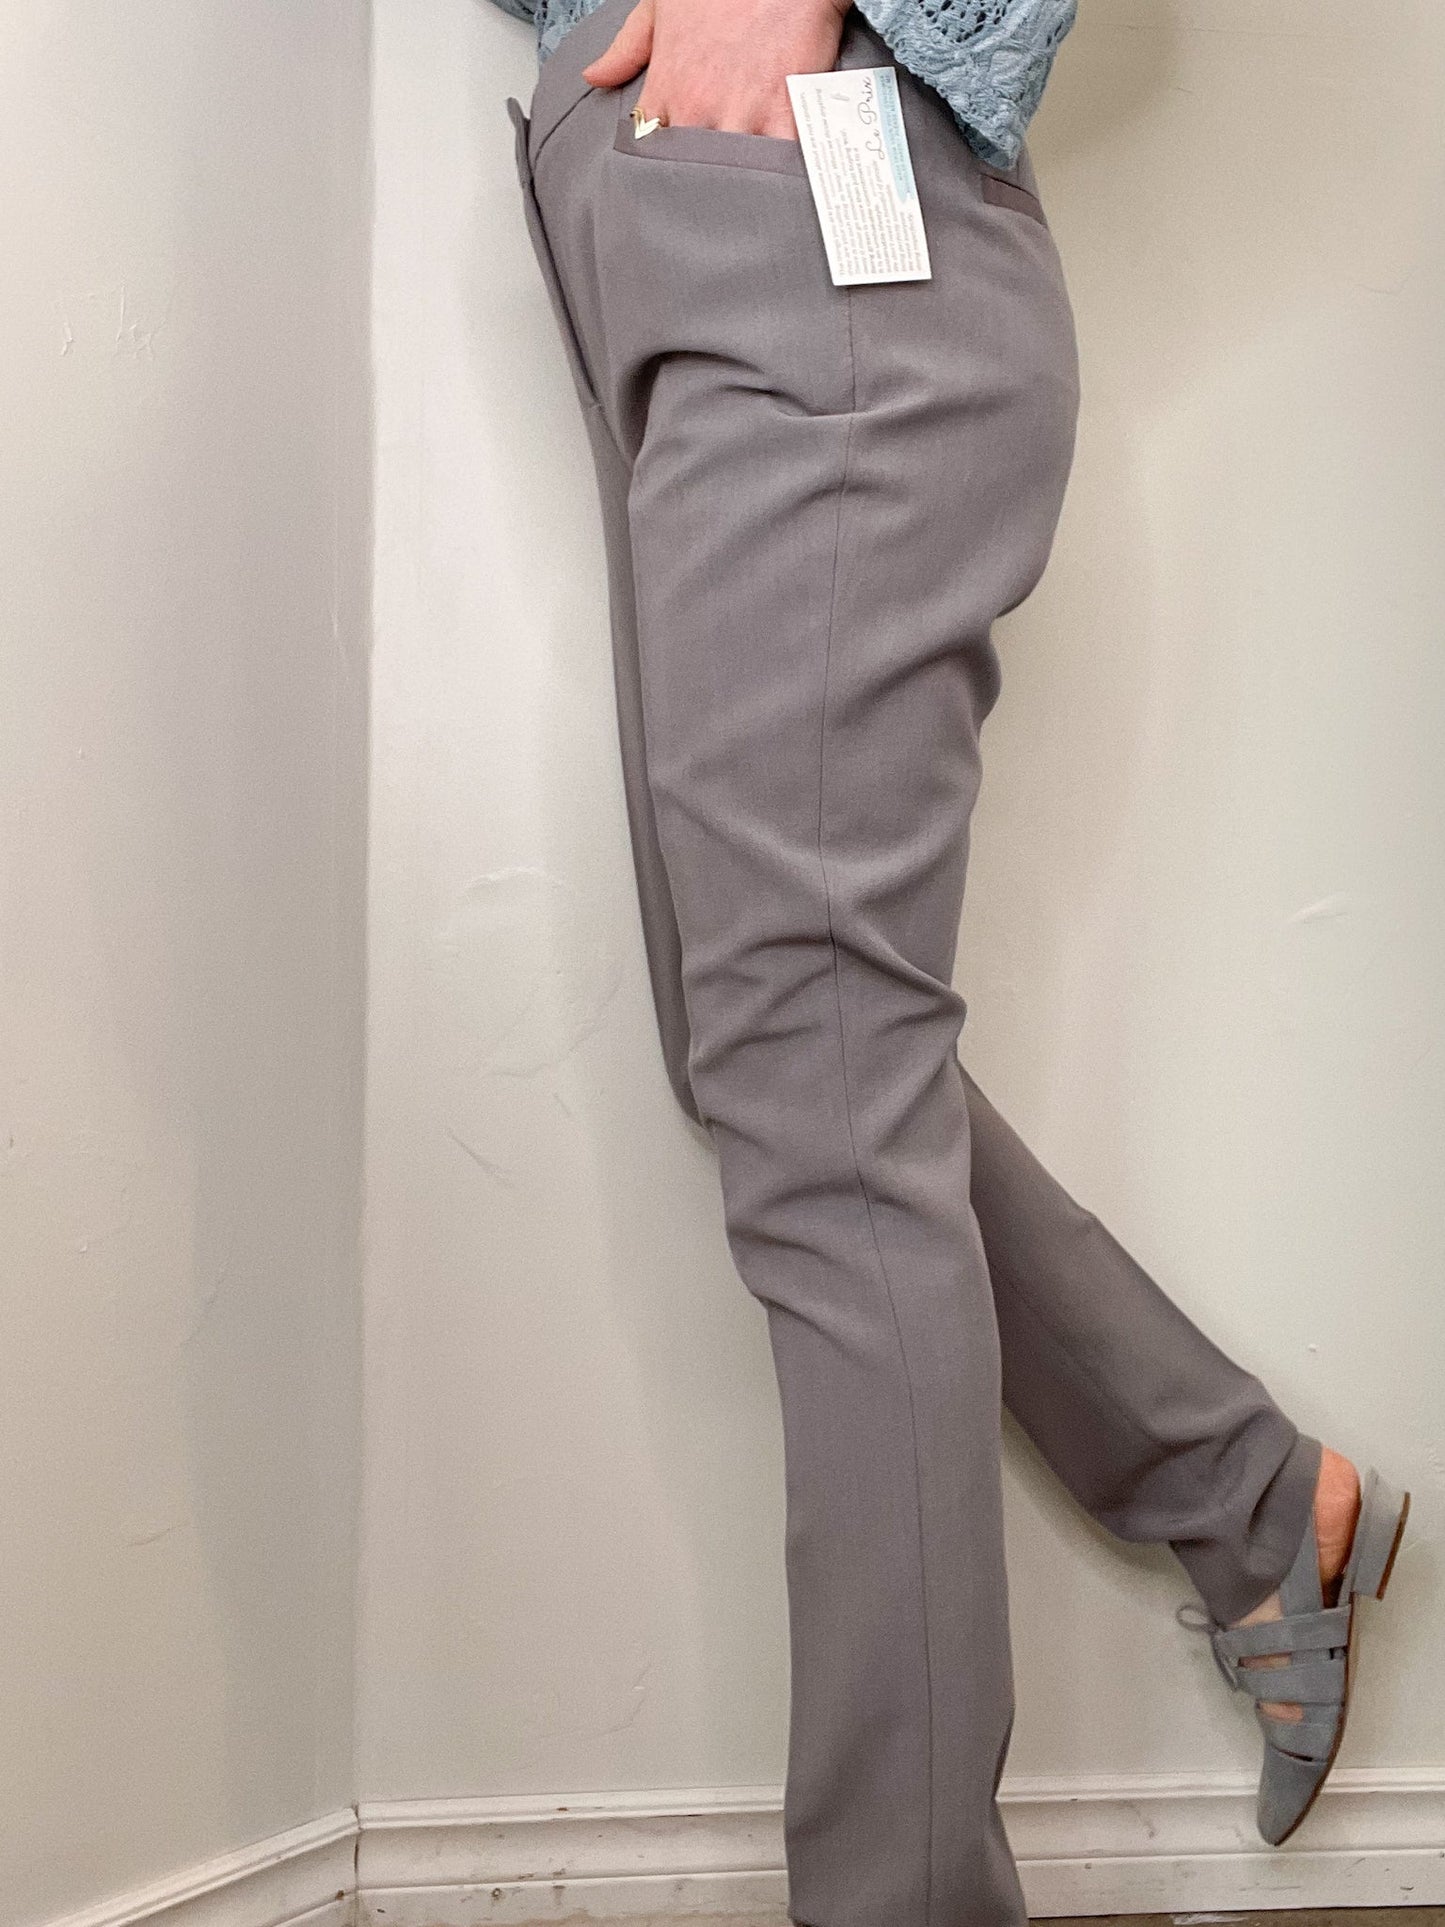 Kenneth Cole Reaction Grey Slim Straight High Rise Trouser Pants - Size 8